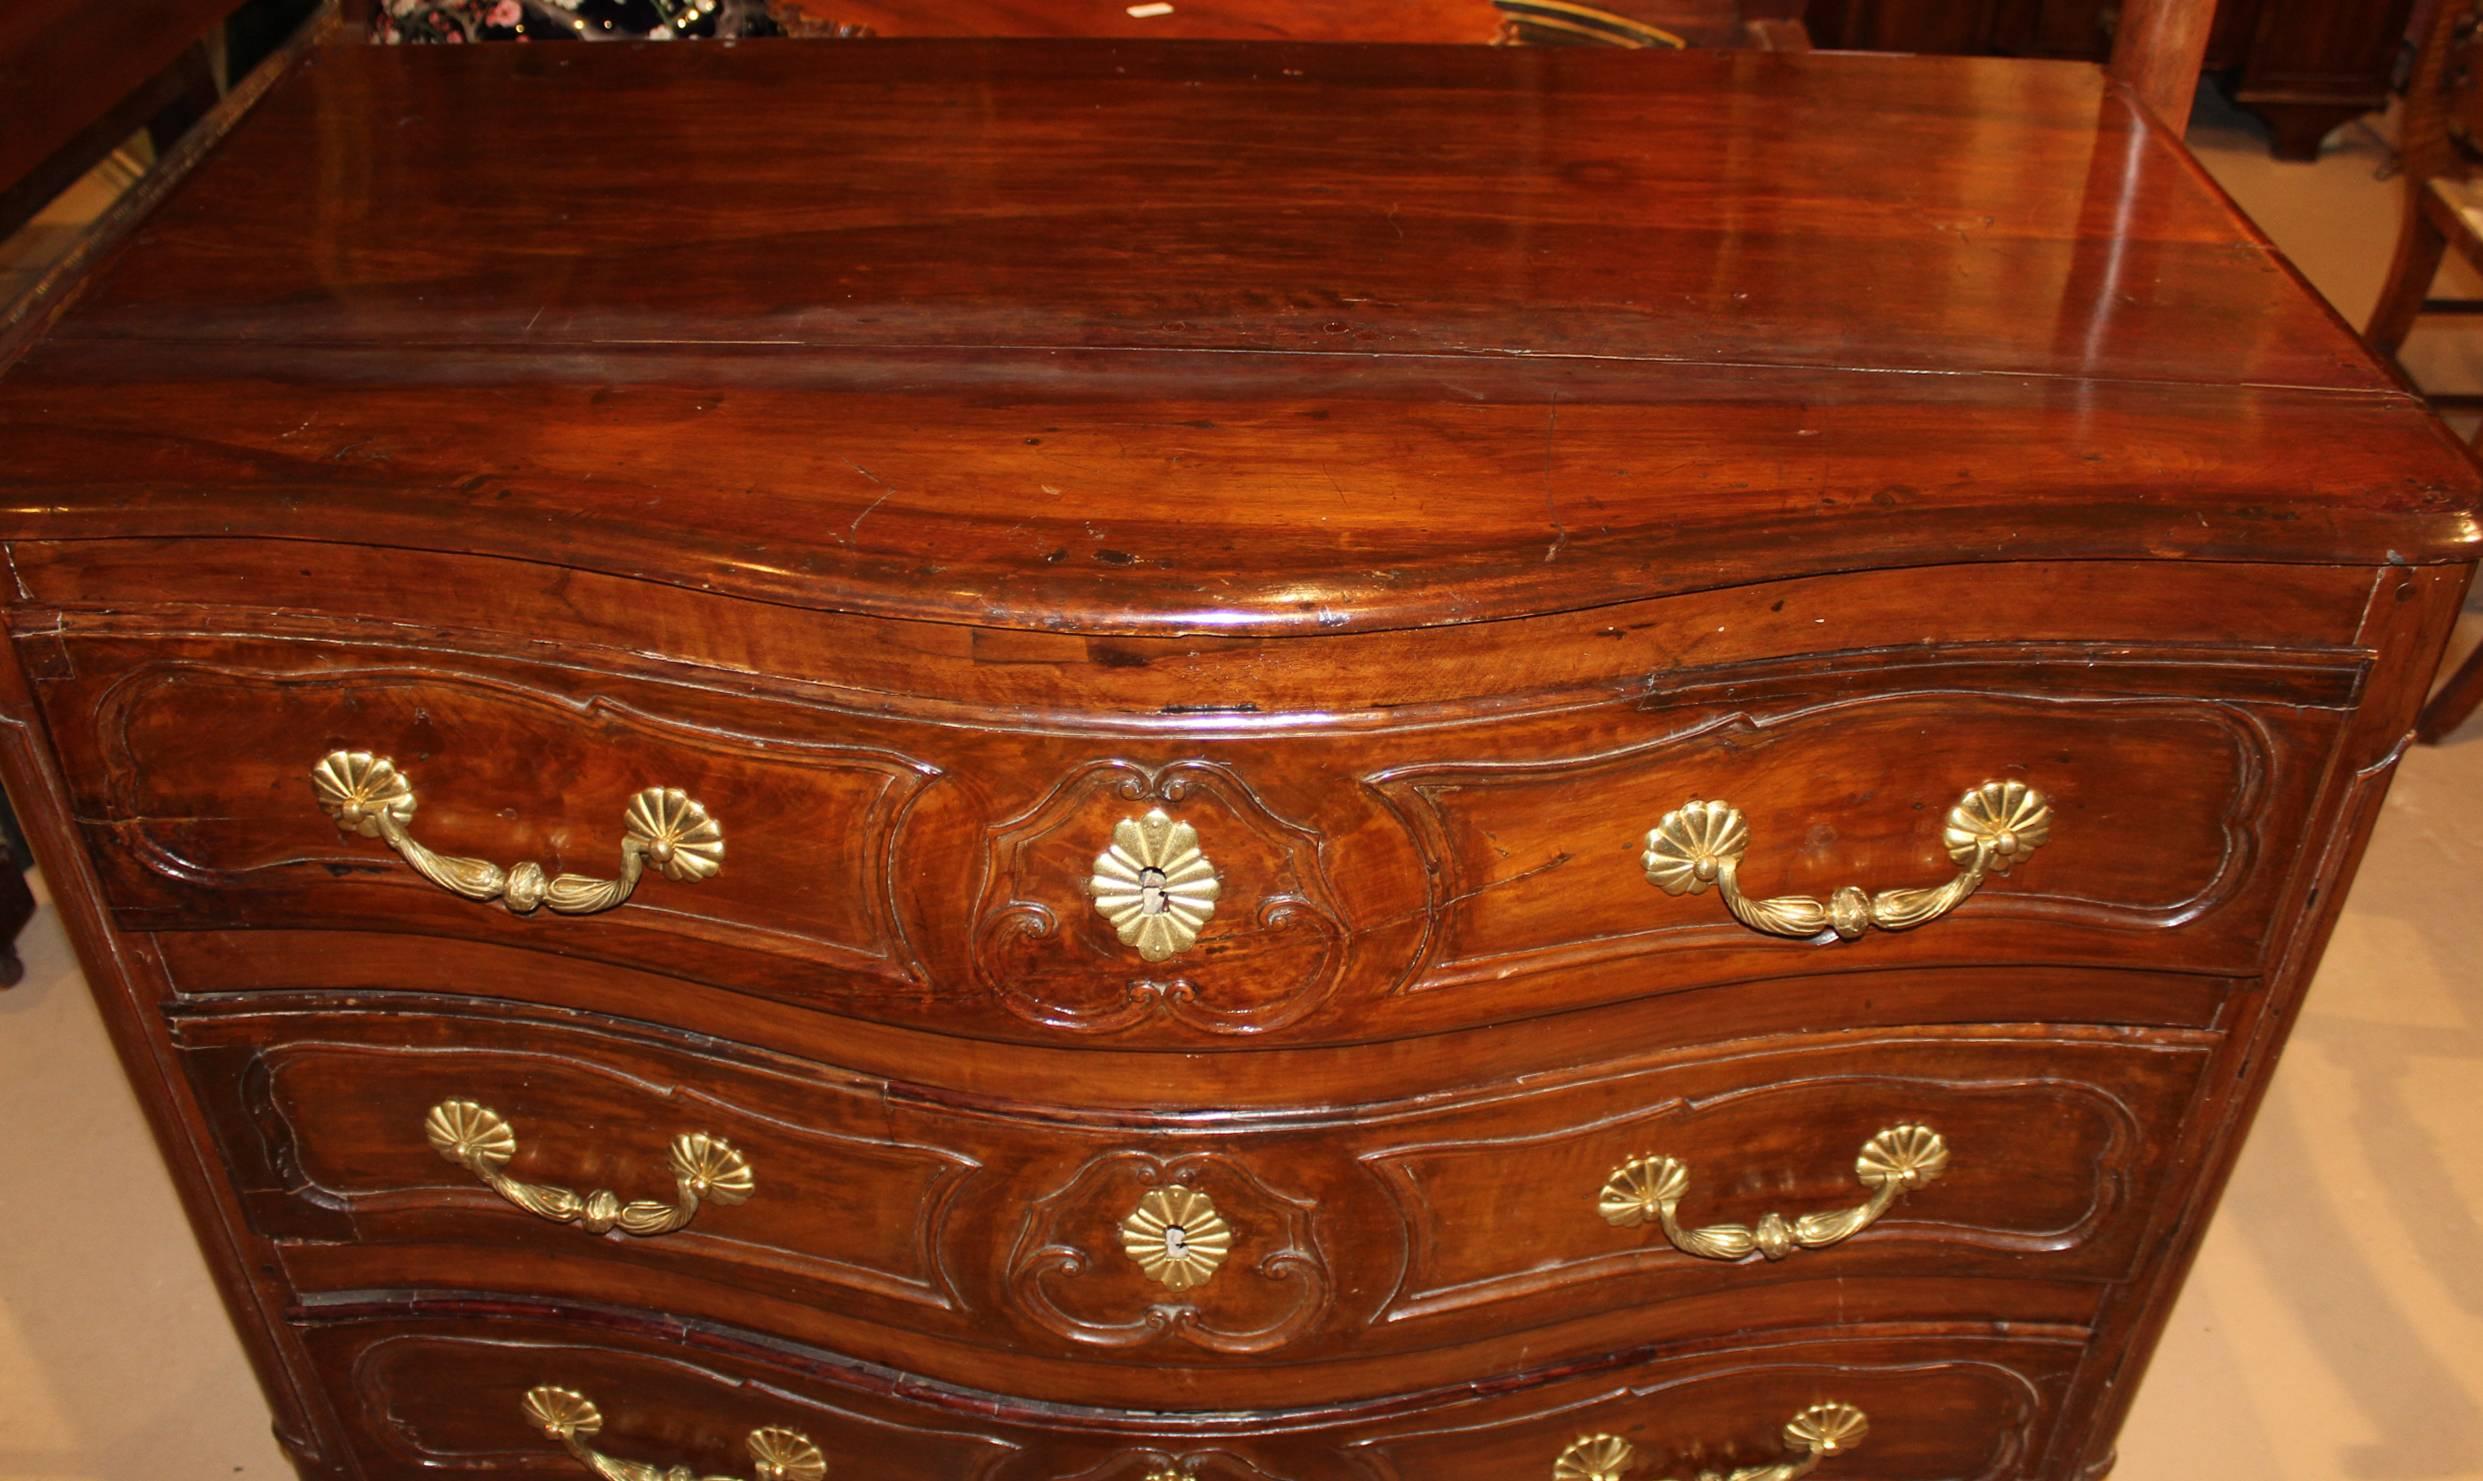 A fine 18th century French three-drawer fruitwood serpentine front commode with nice foliate carving and shaped skirt.